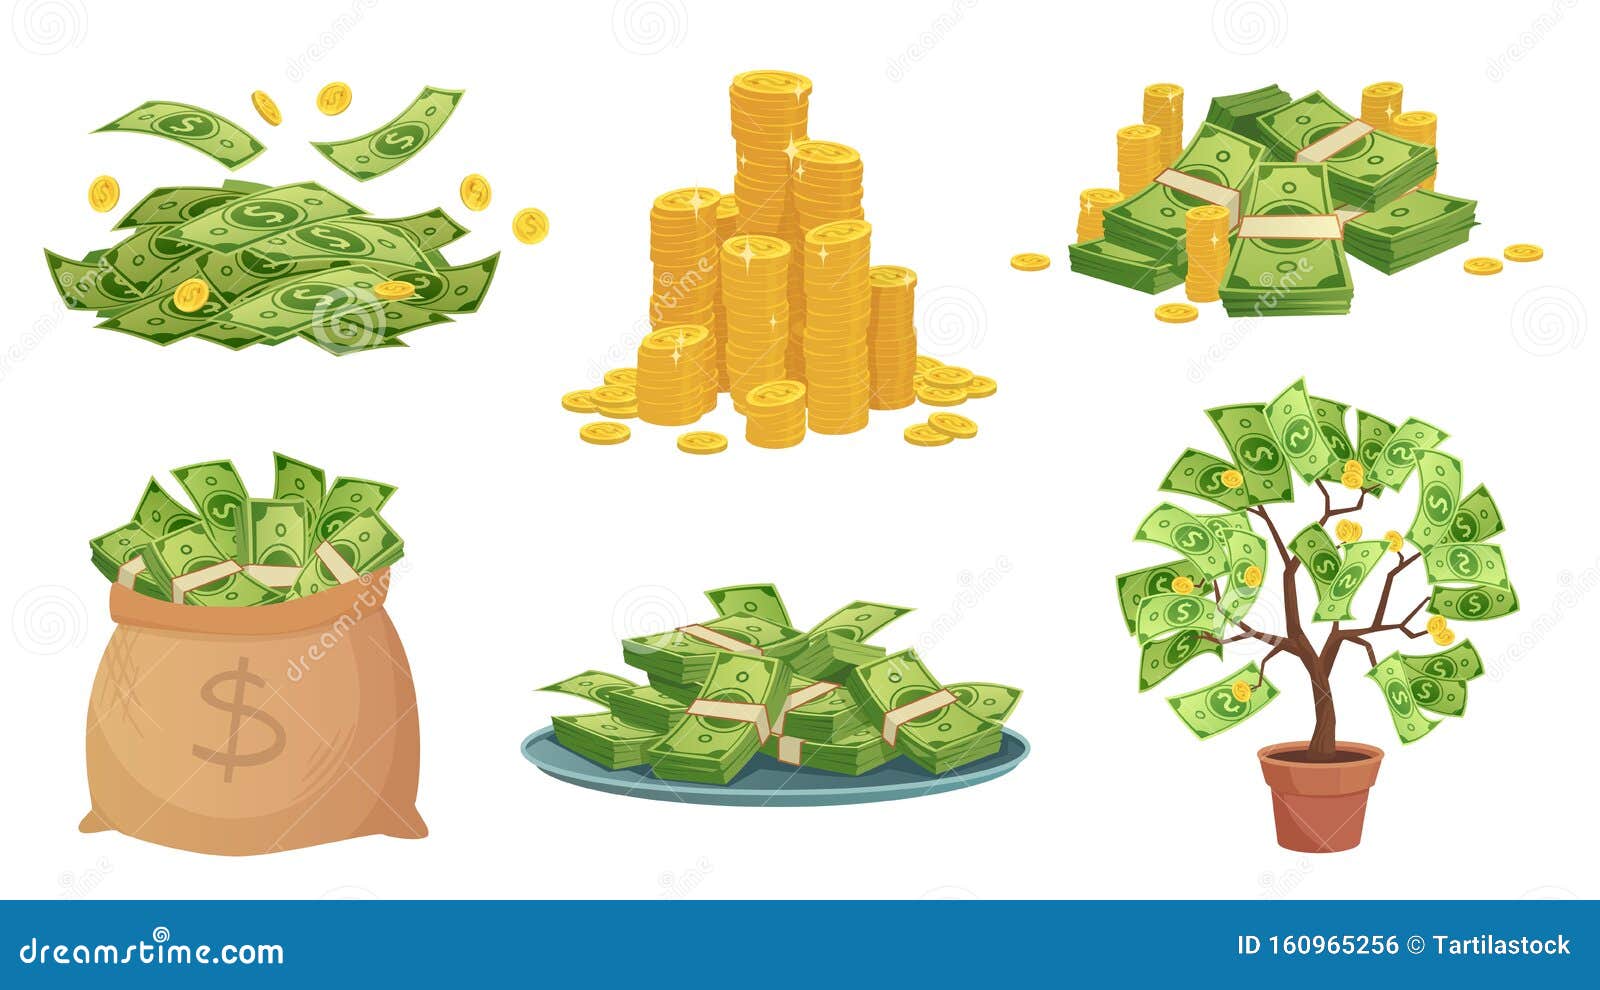 cartoon cash. green dollar banknotes pile, rich gold coins and pay. cash bag, tray with stacks of bills and money tree